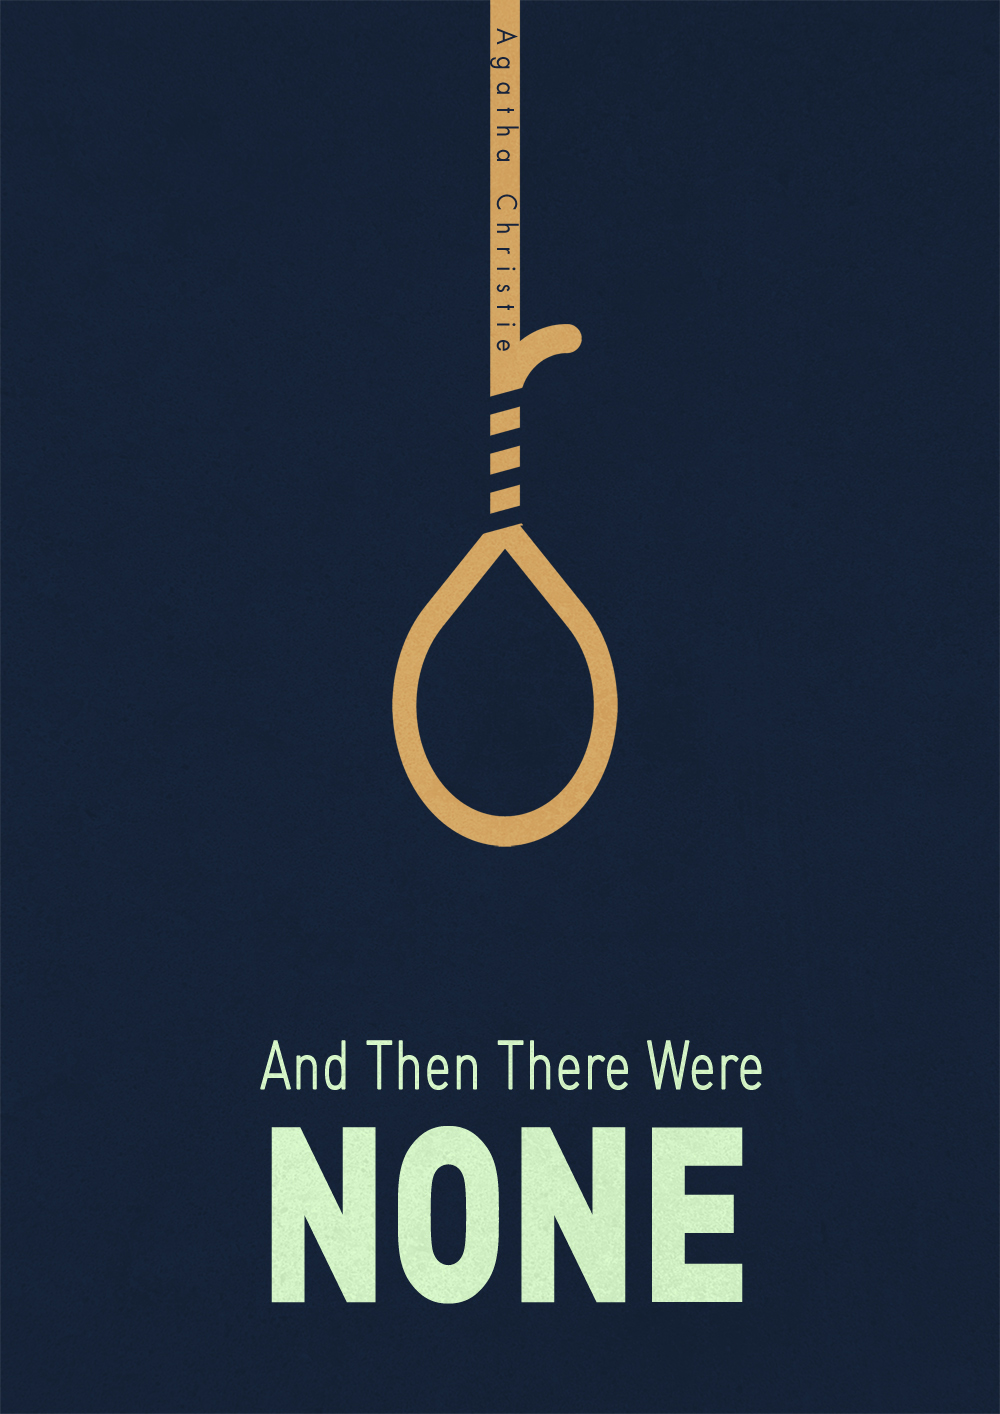 And Then There Were None wallpaper, TV Show, HQ And Then There Were None pictureK Wallpaper 2019